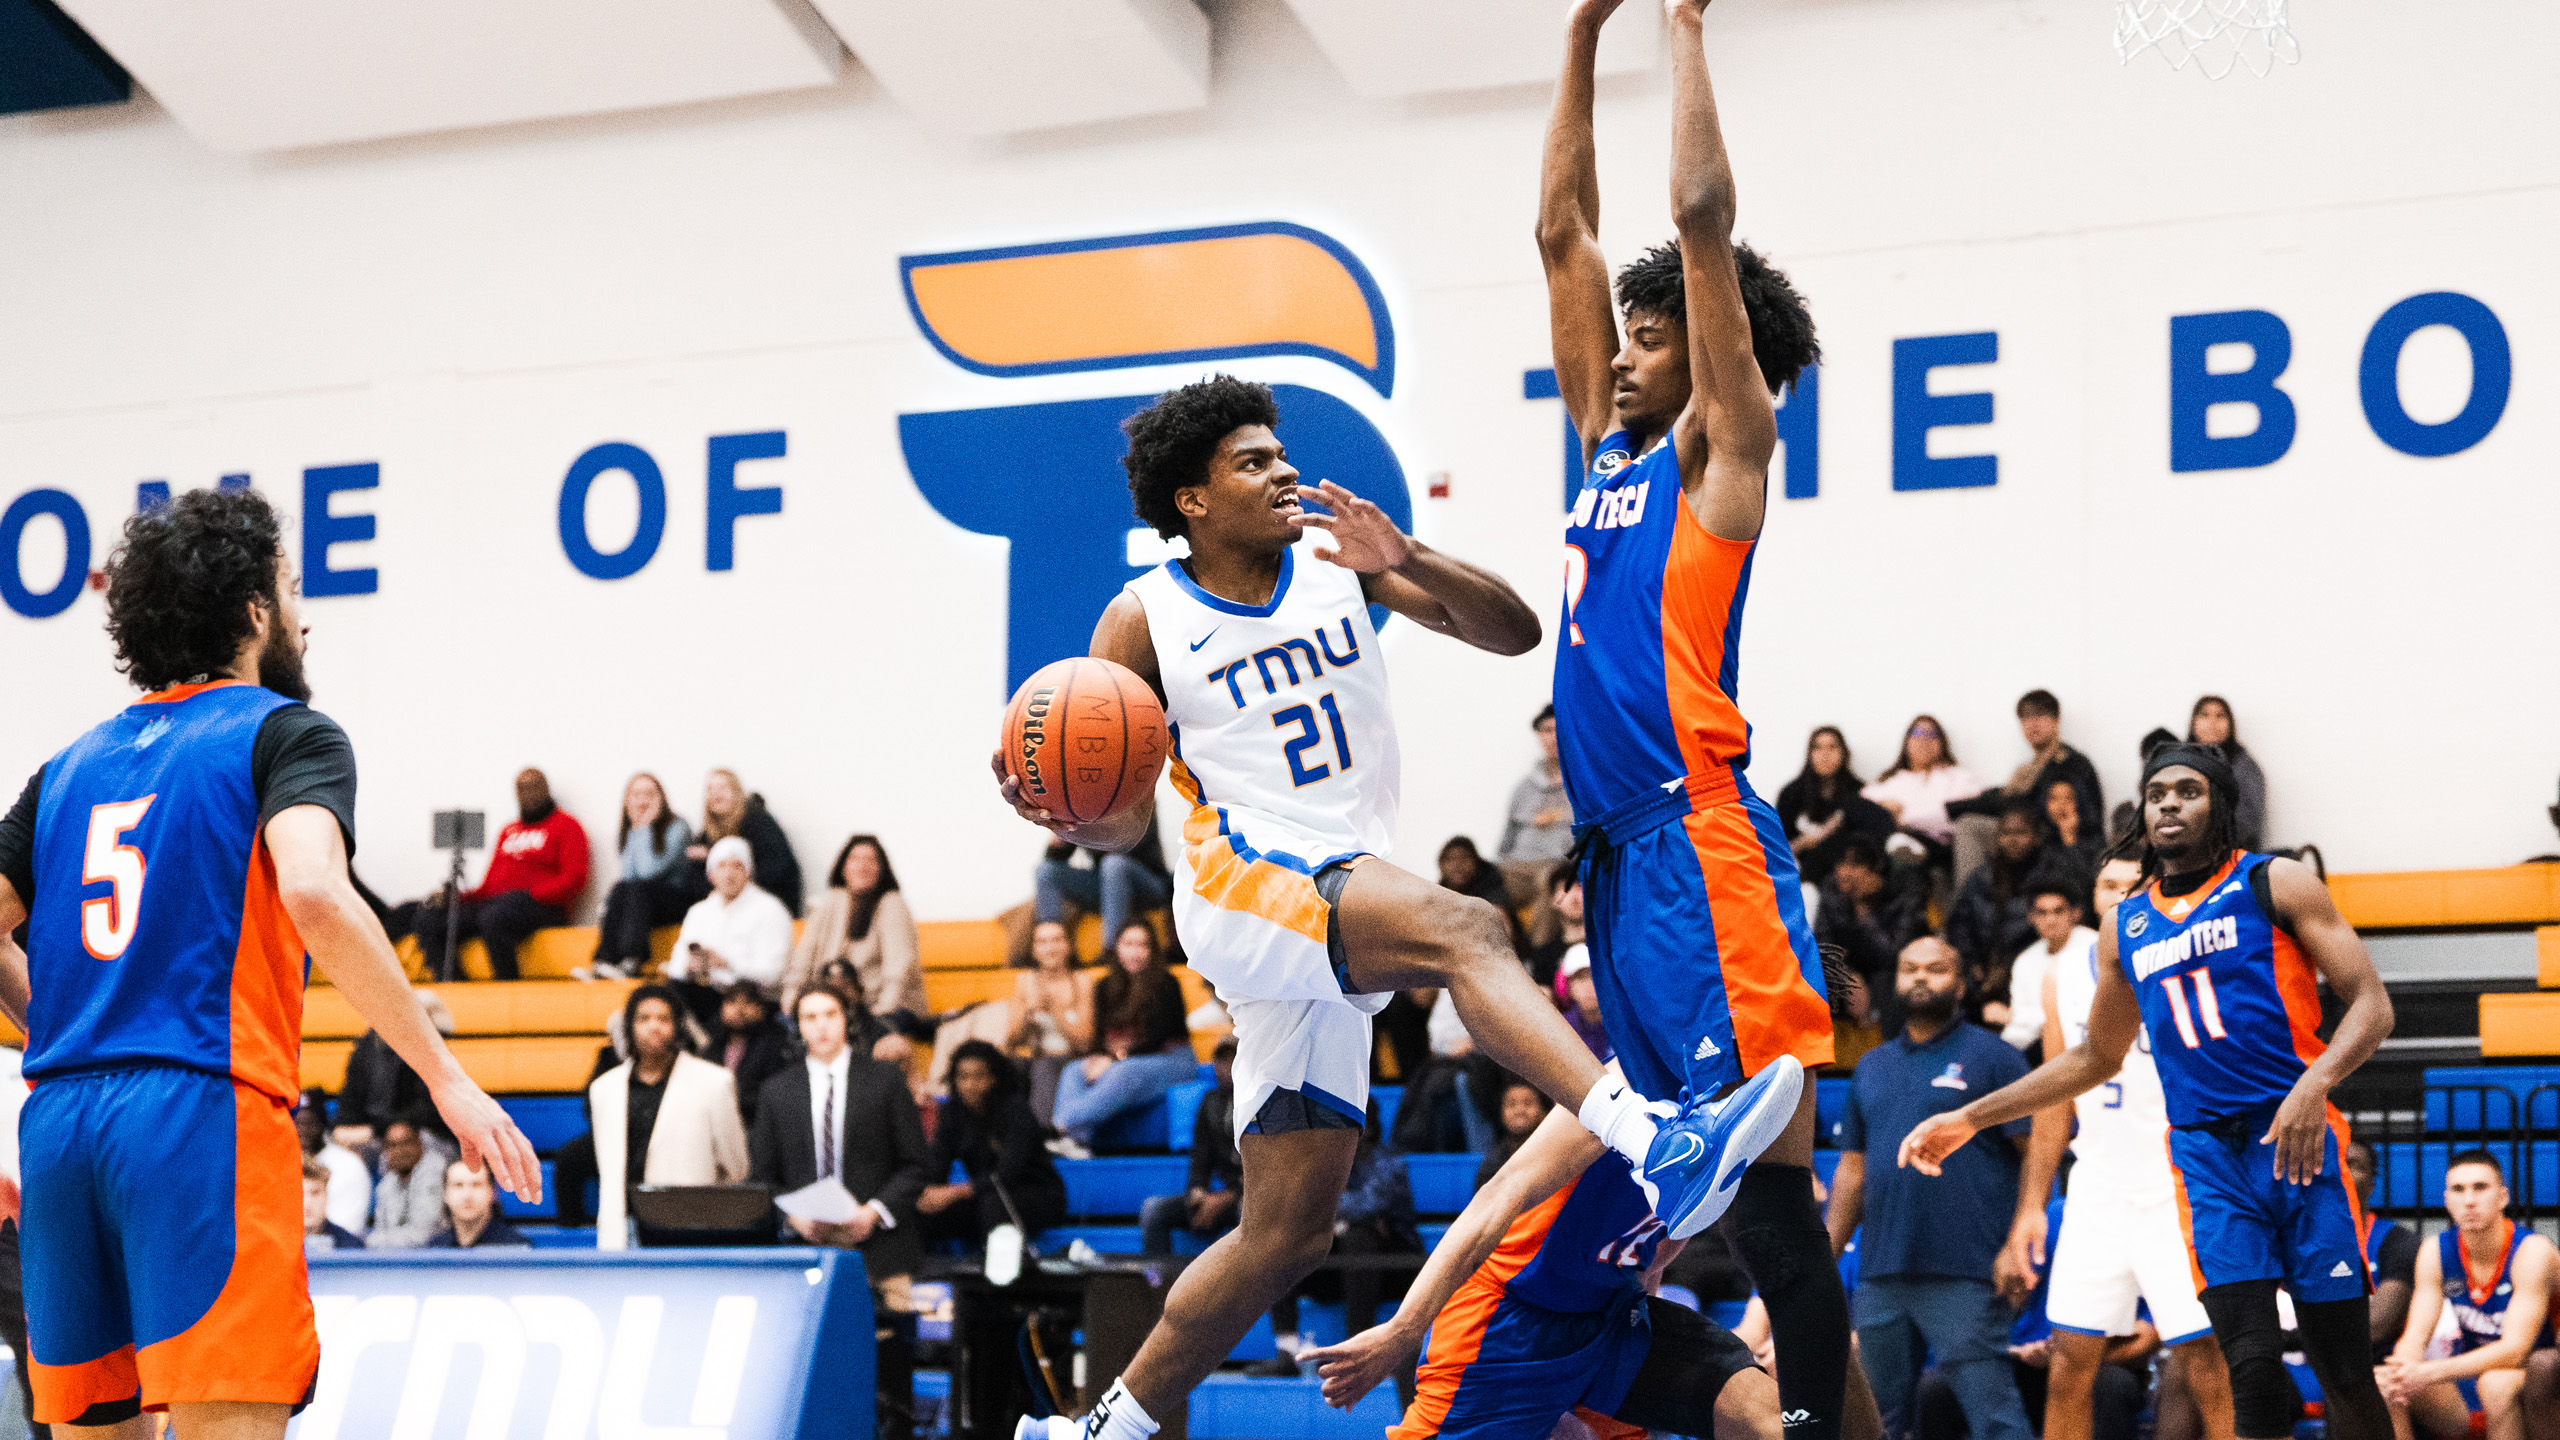 TMU men's basketball player Gabe Gutsmore goes up for a layup against an Ontario Tech defender